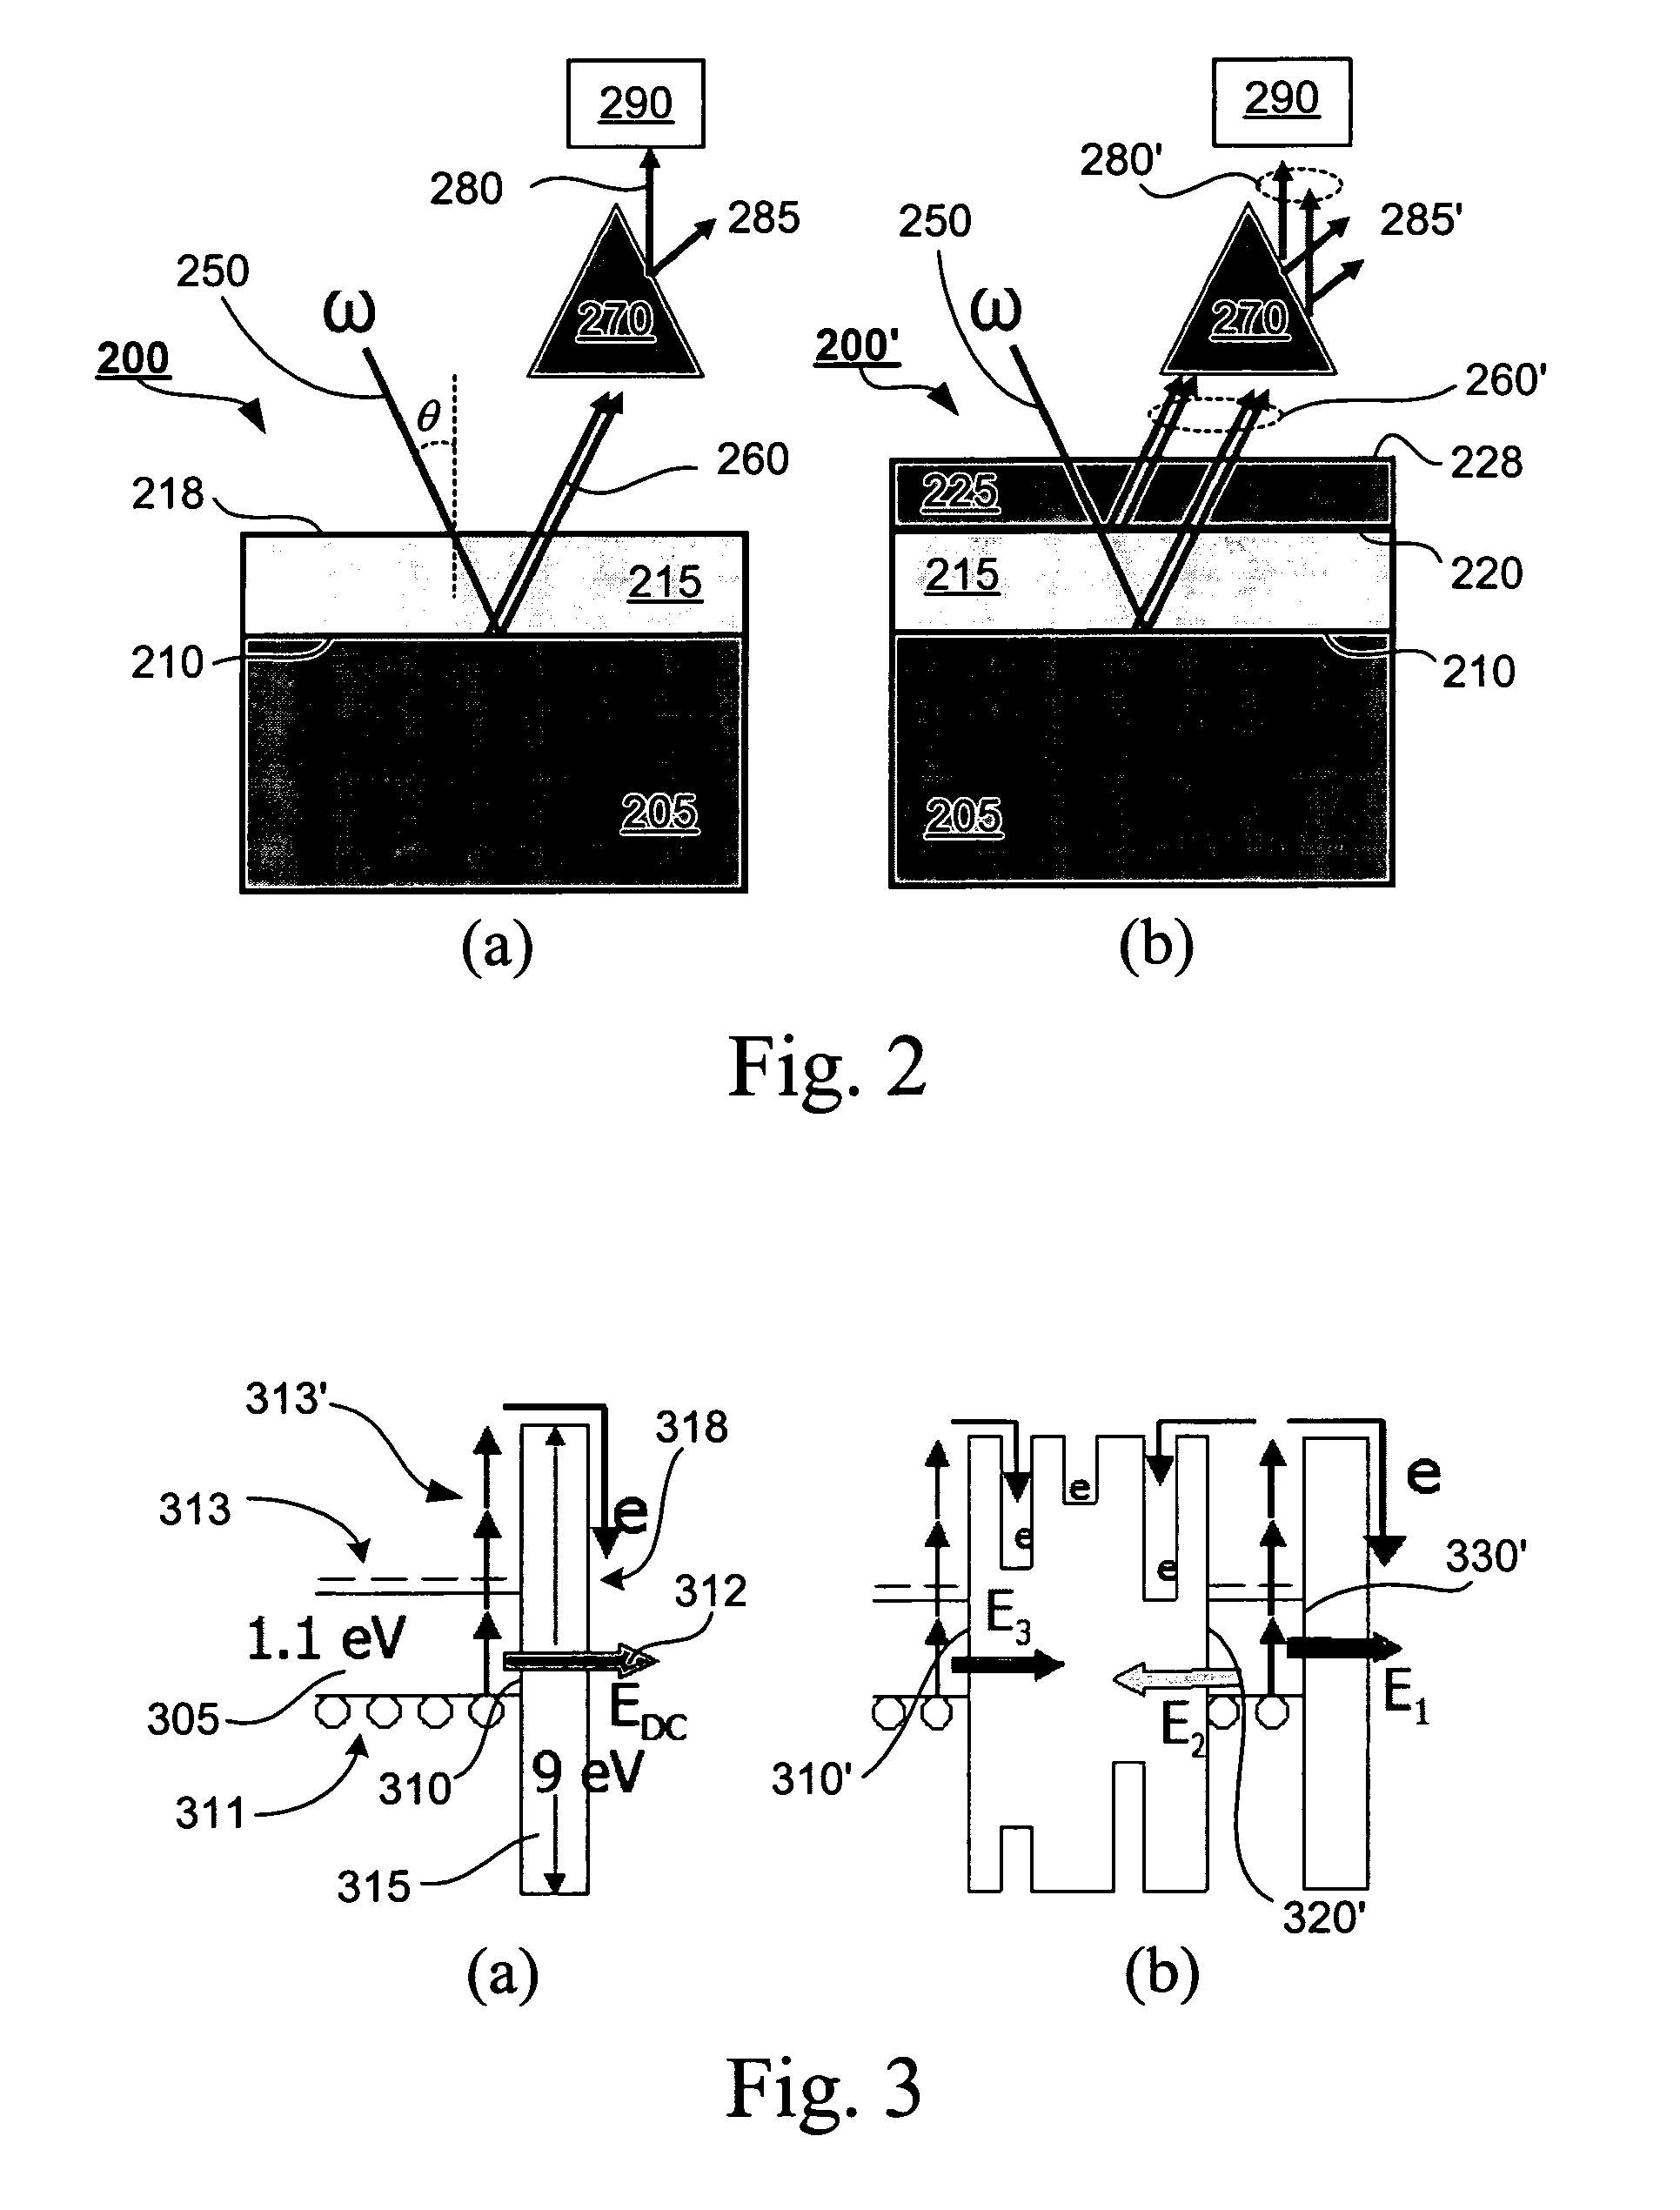 Apparatus and methods of using second harmonic generation as a non-invasive optical probe for interface properties in layered structures